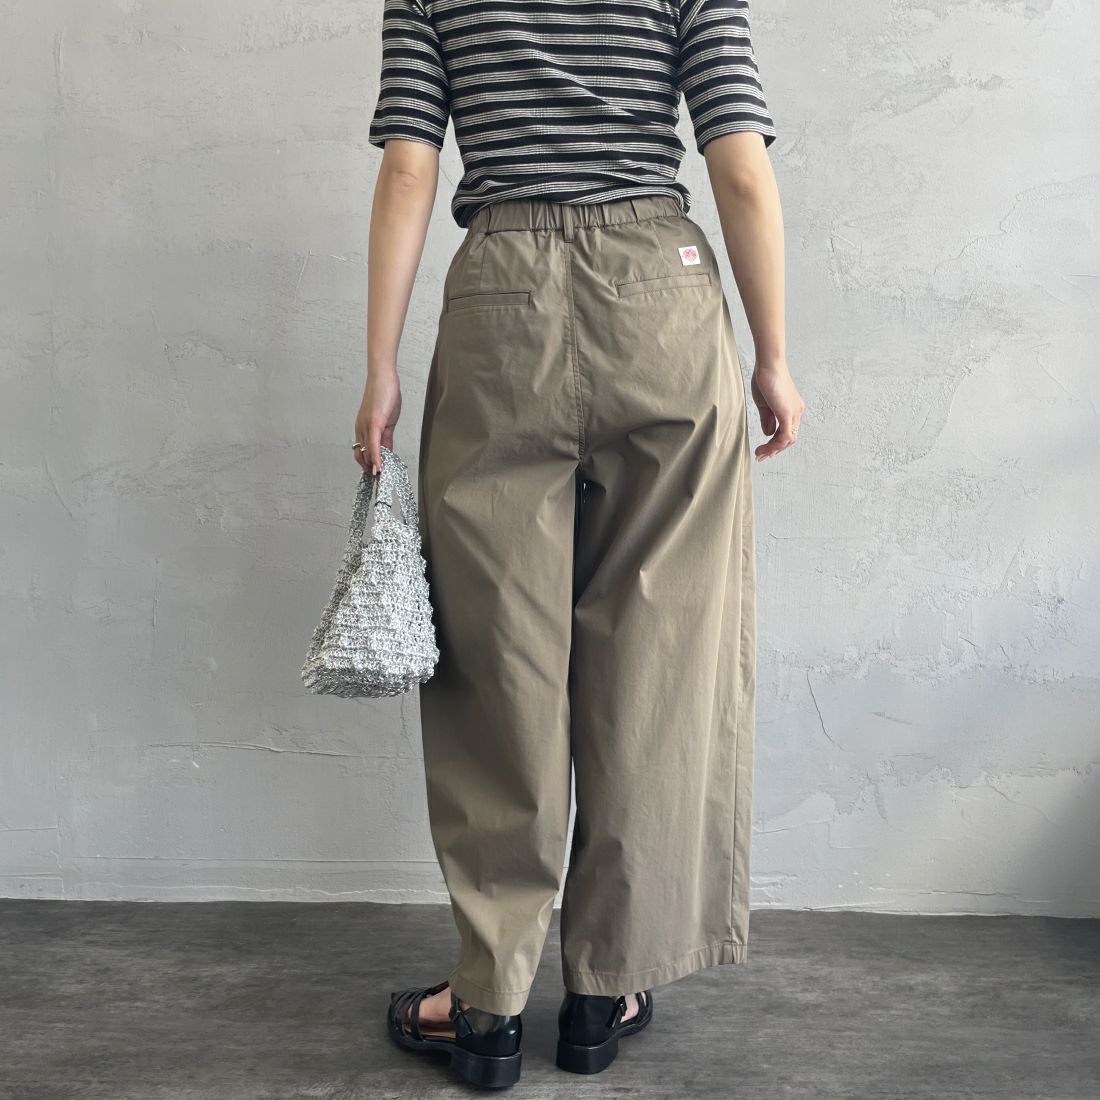 DANTON [ダントン] 2TUCK WIDE PANTS [DT-E0170CPY] TAUPE &&モデル身長：163cm 着用サイズ：36&&